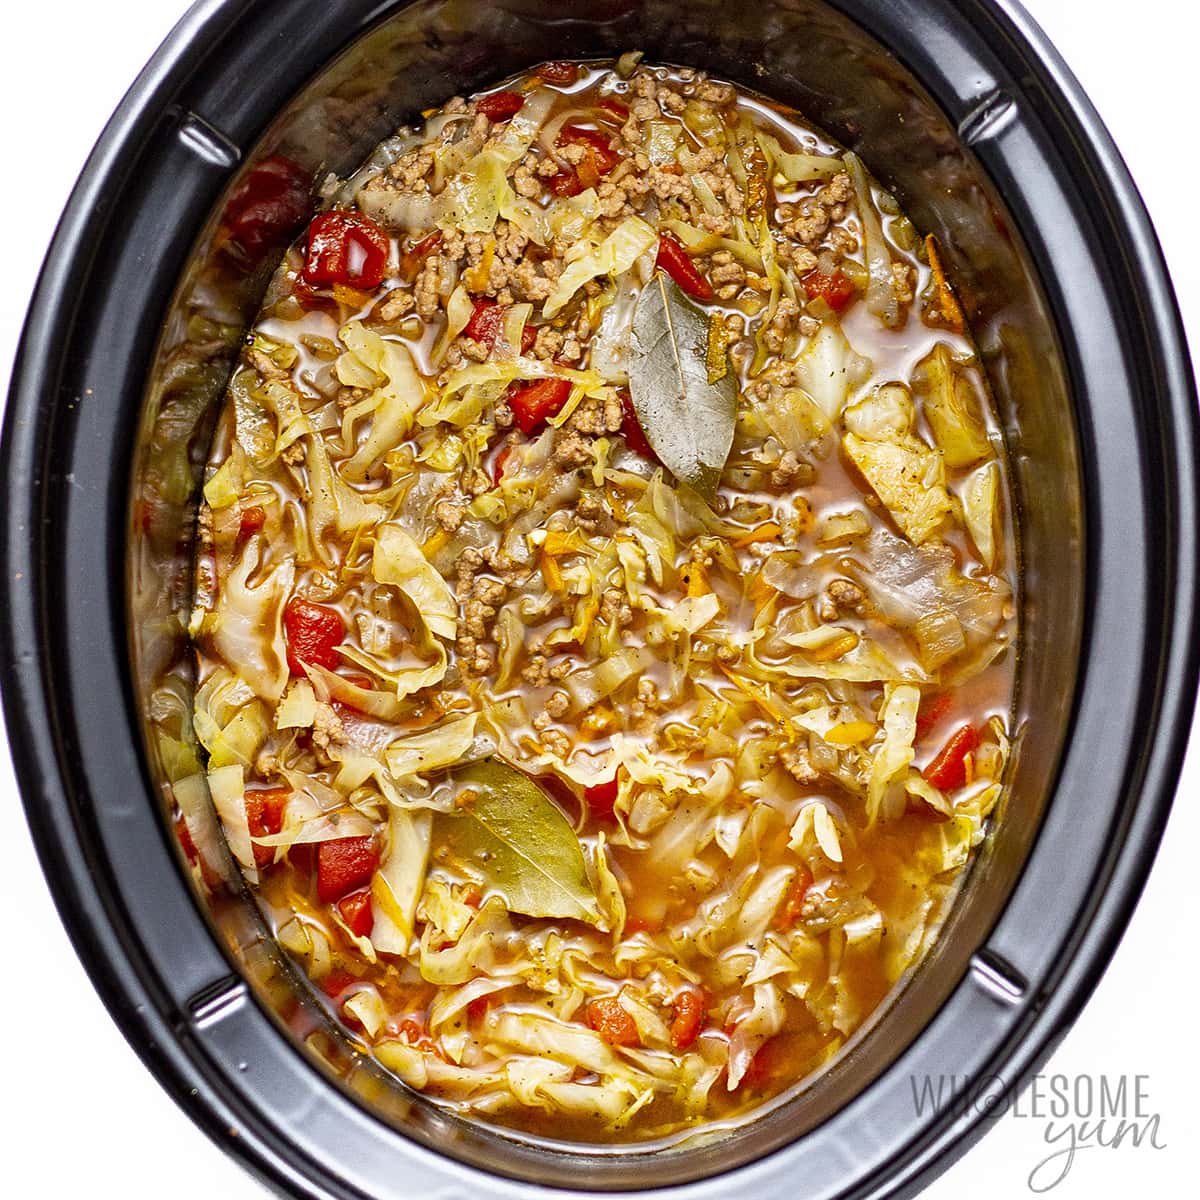 Fully cooked cabbage soup in Crock Pot.